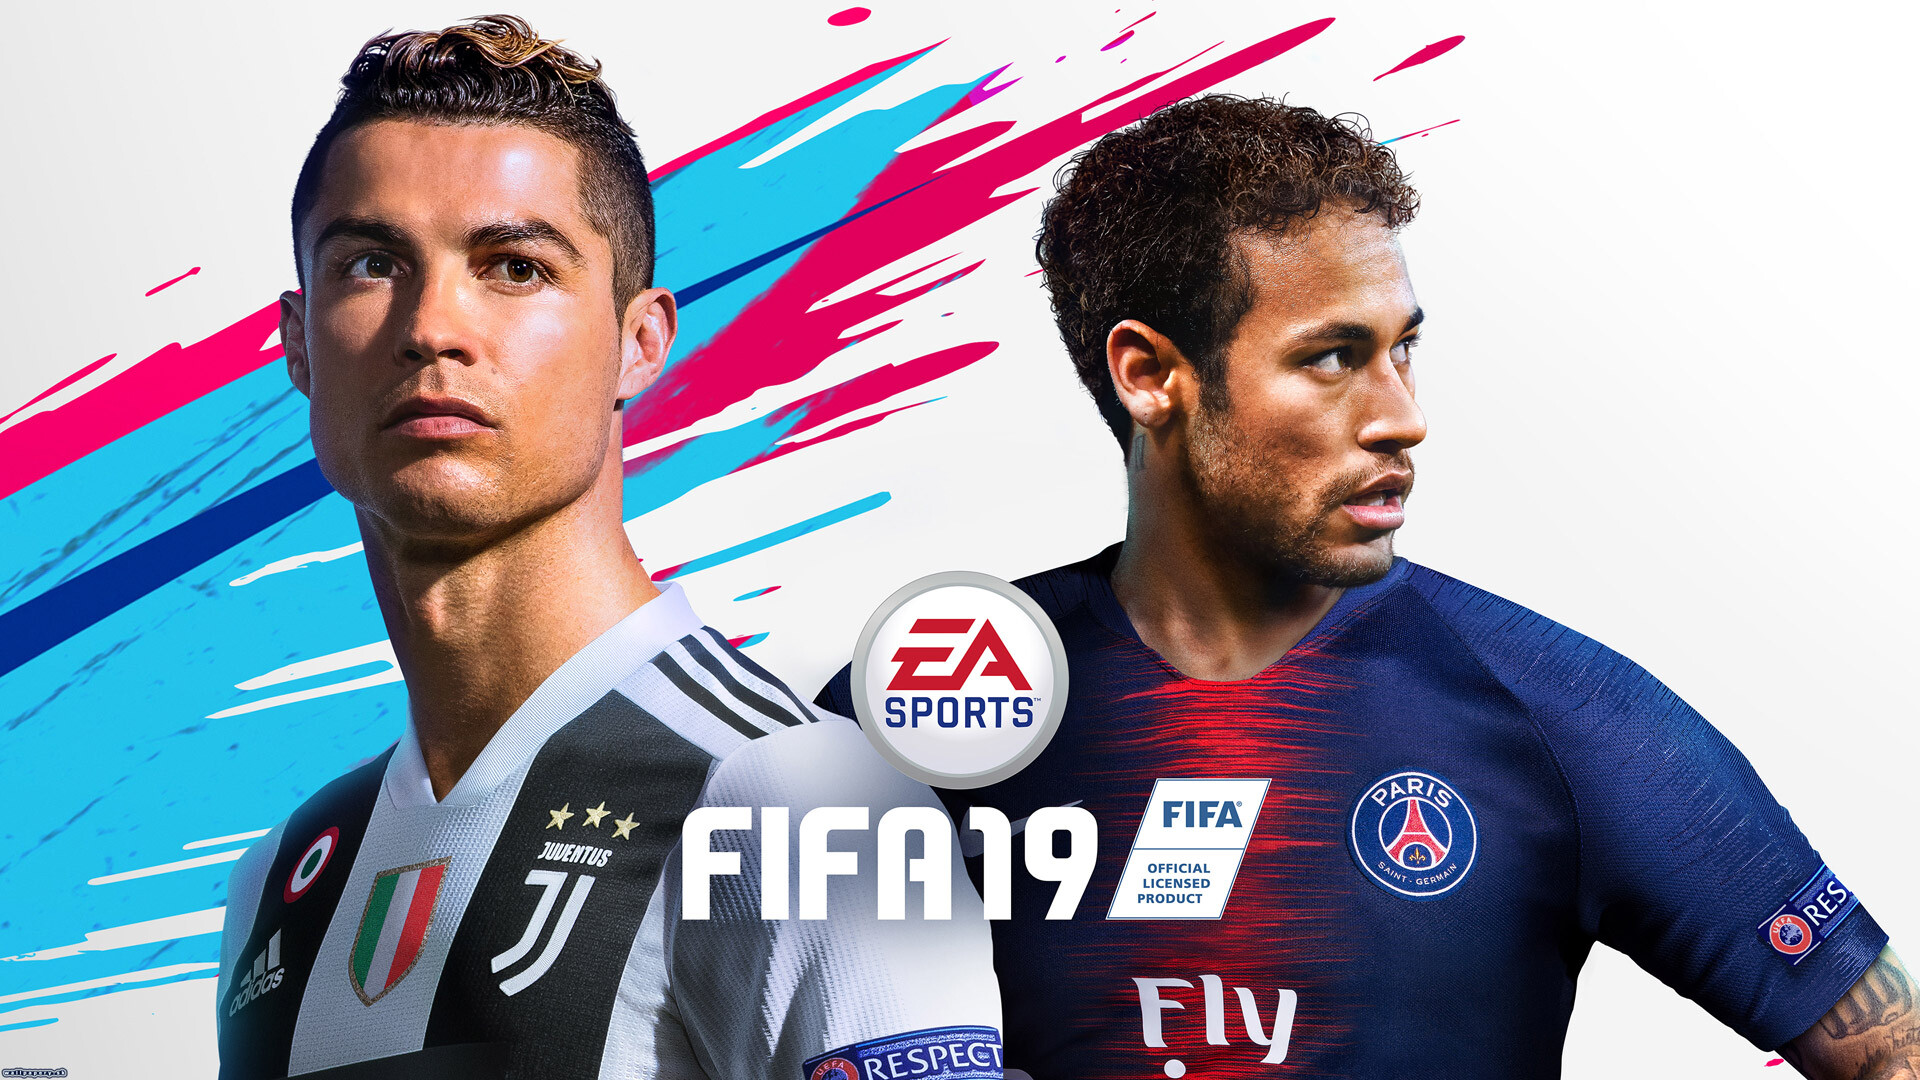 FIFA: A 2019 football simulation video game developed by EA Vancouver. 1920x1080 Full HD Wallpaper.